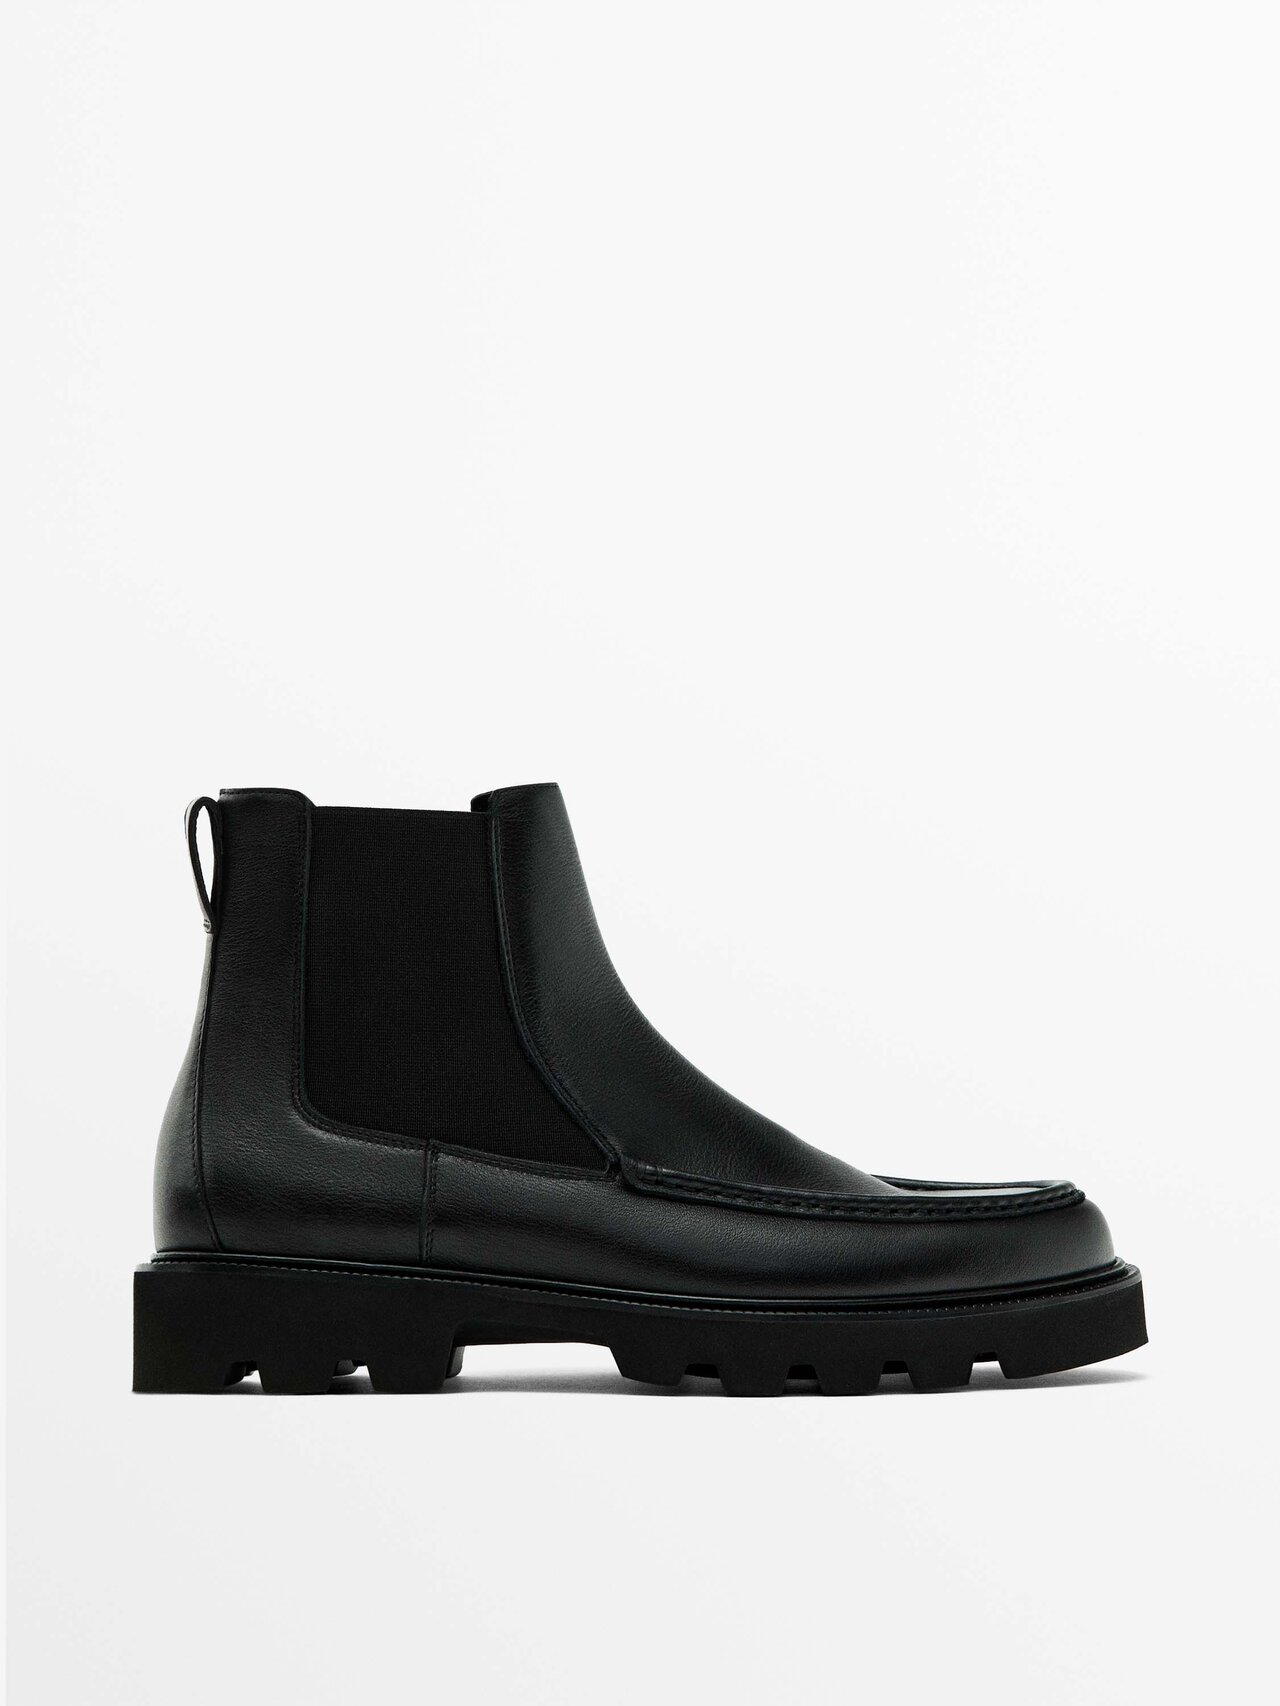 Massimo Dutti Black Chelsea Boots With Moc Toe Detail